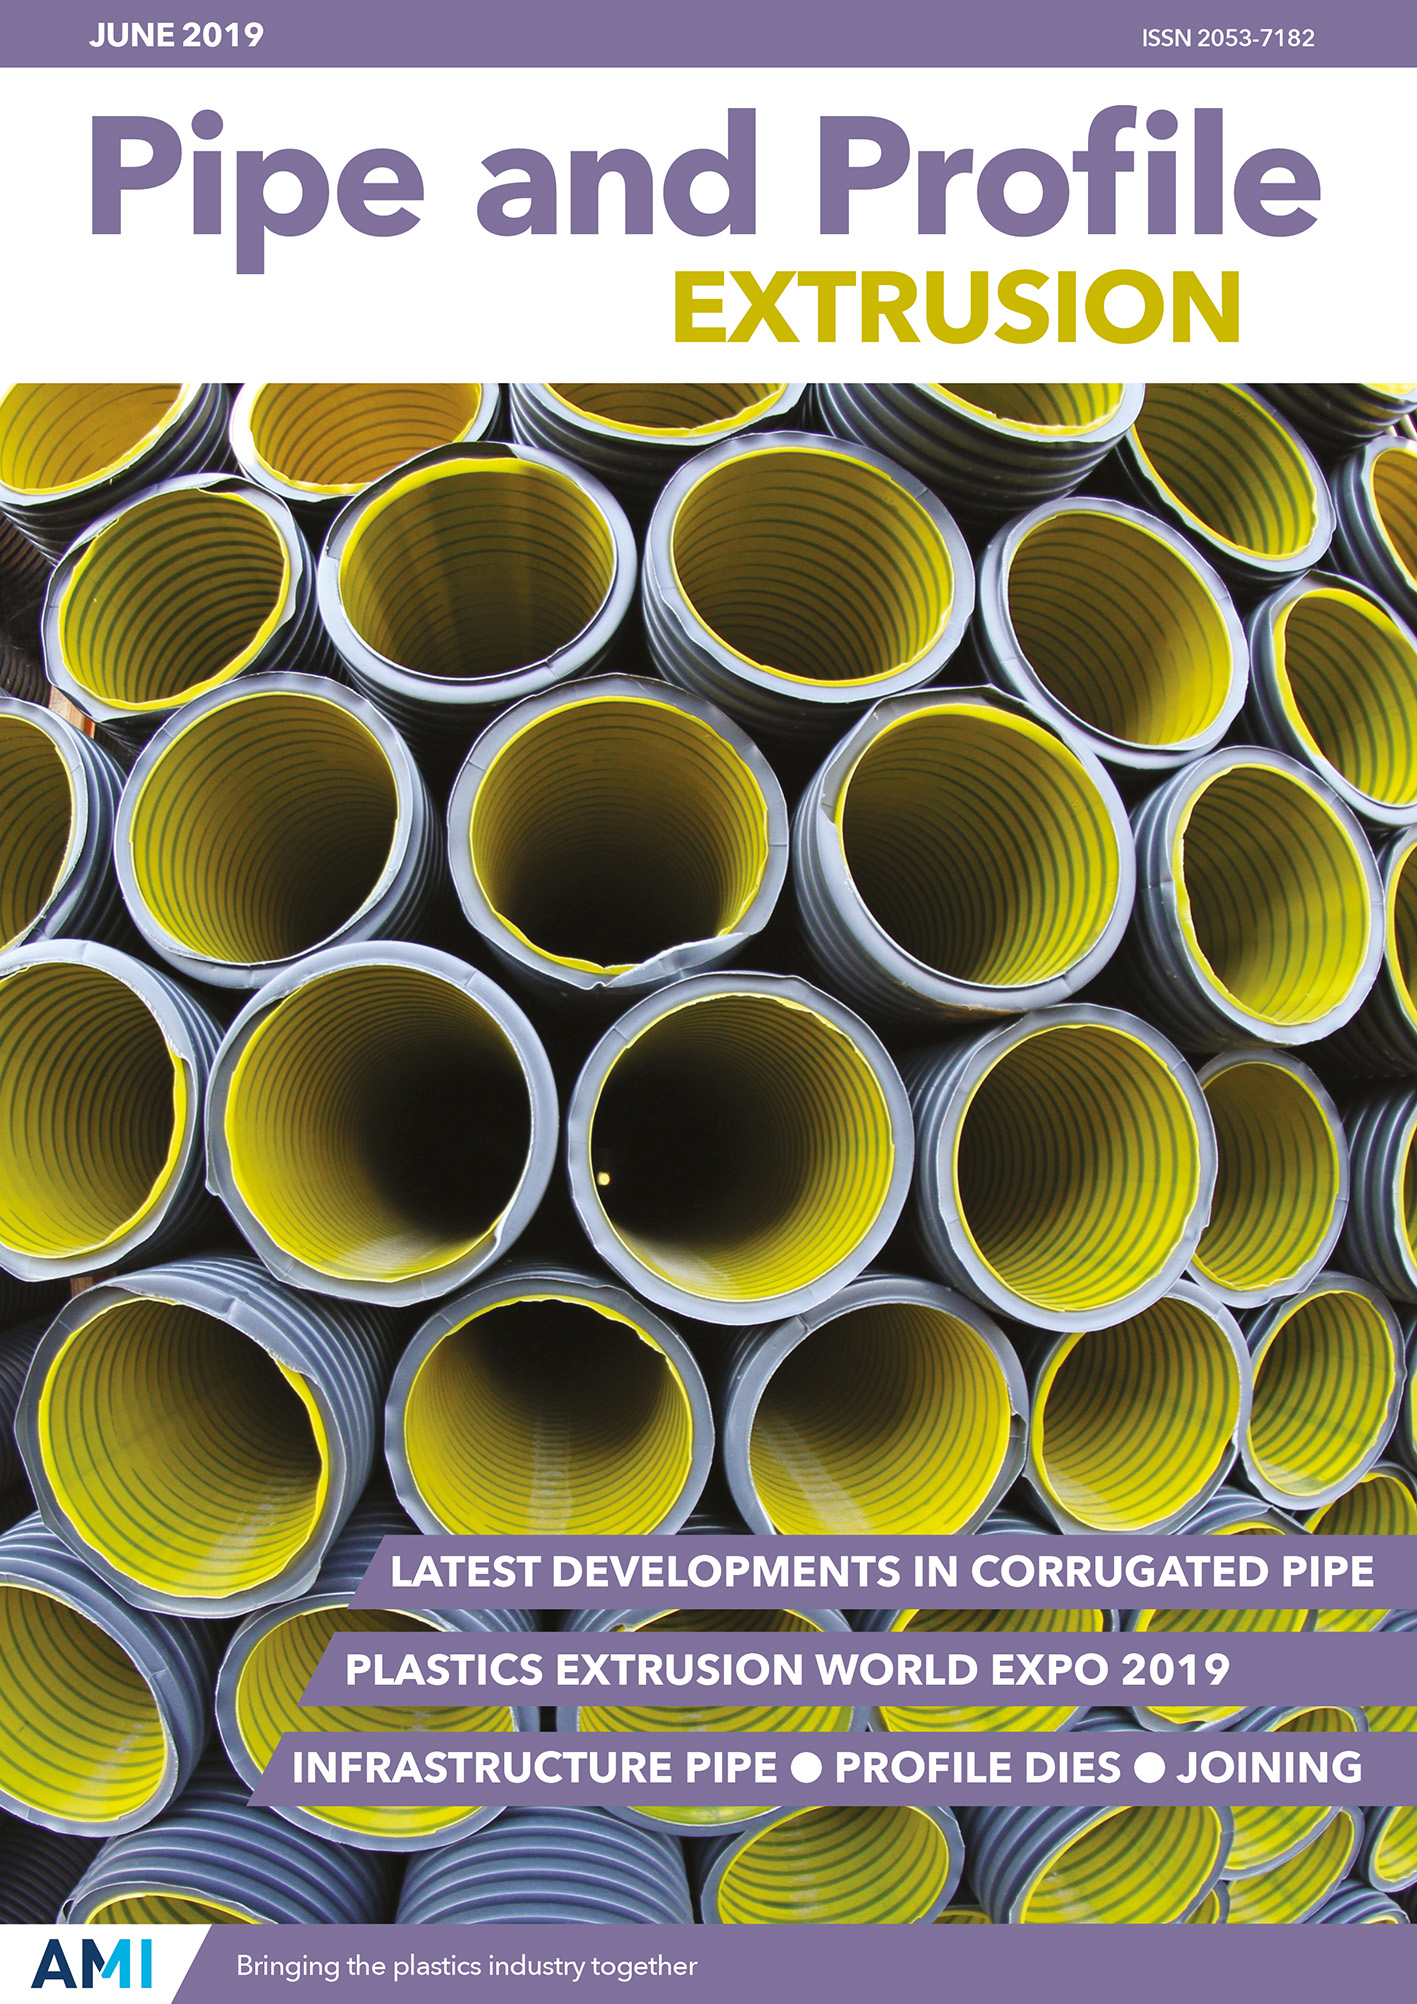 Pipe and Profile Extrusion June 2019